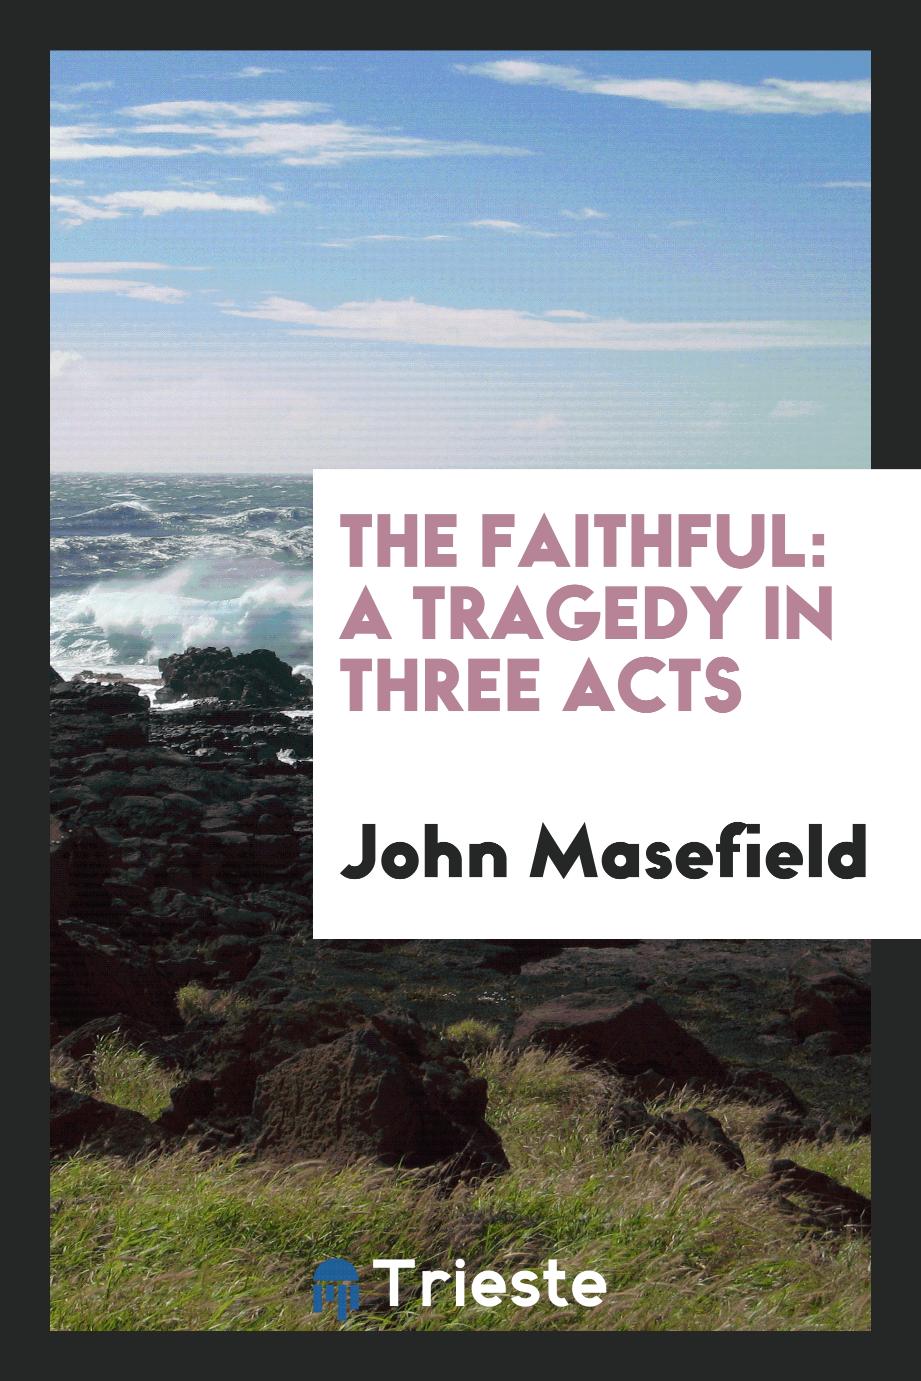 The Faithful: A Tragedy in Three Acts